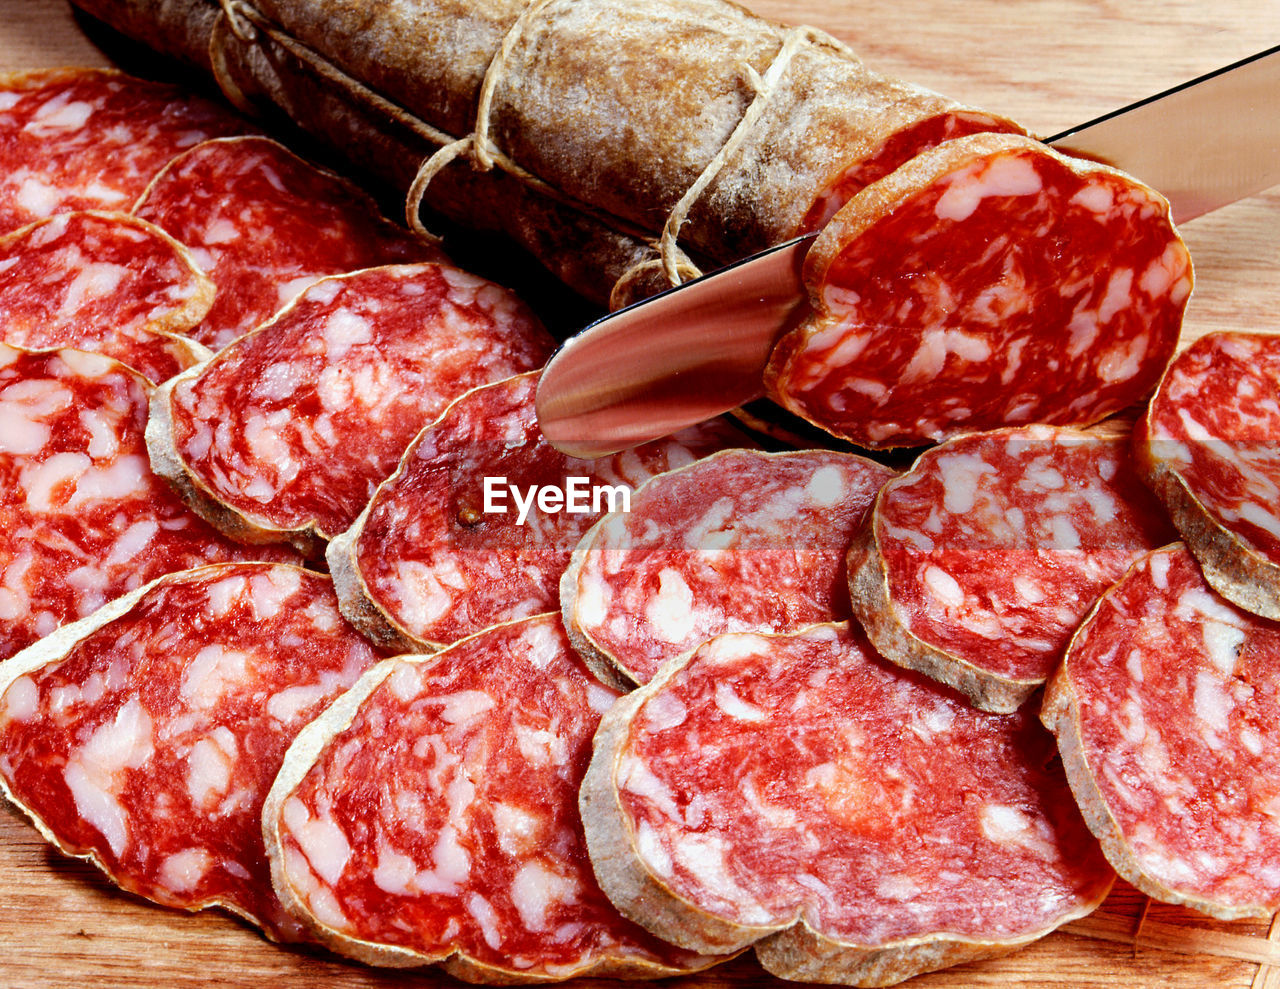 Sliced fresh salami, a traditional dried and cured italian sausage prepared from meat